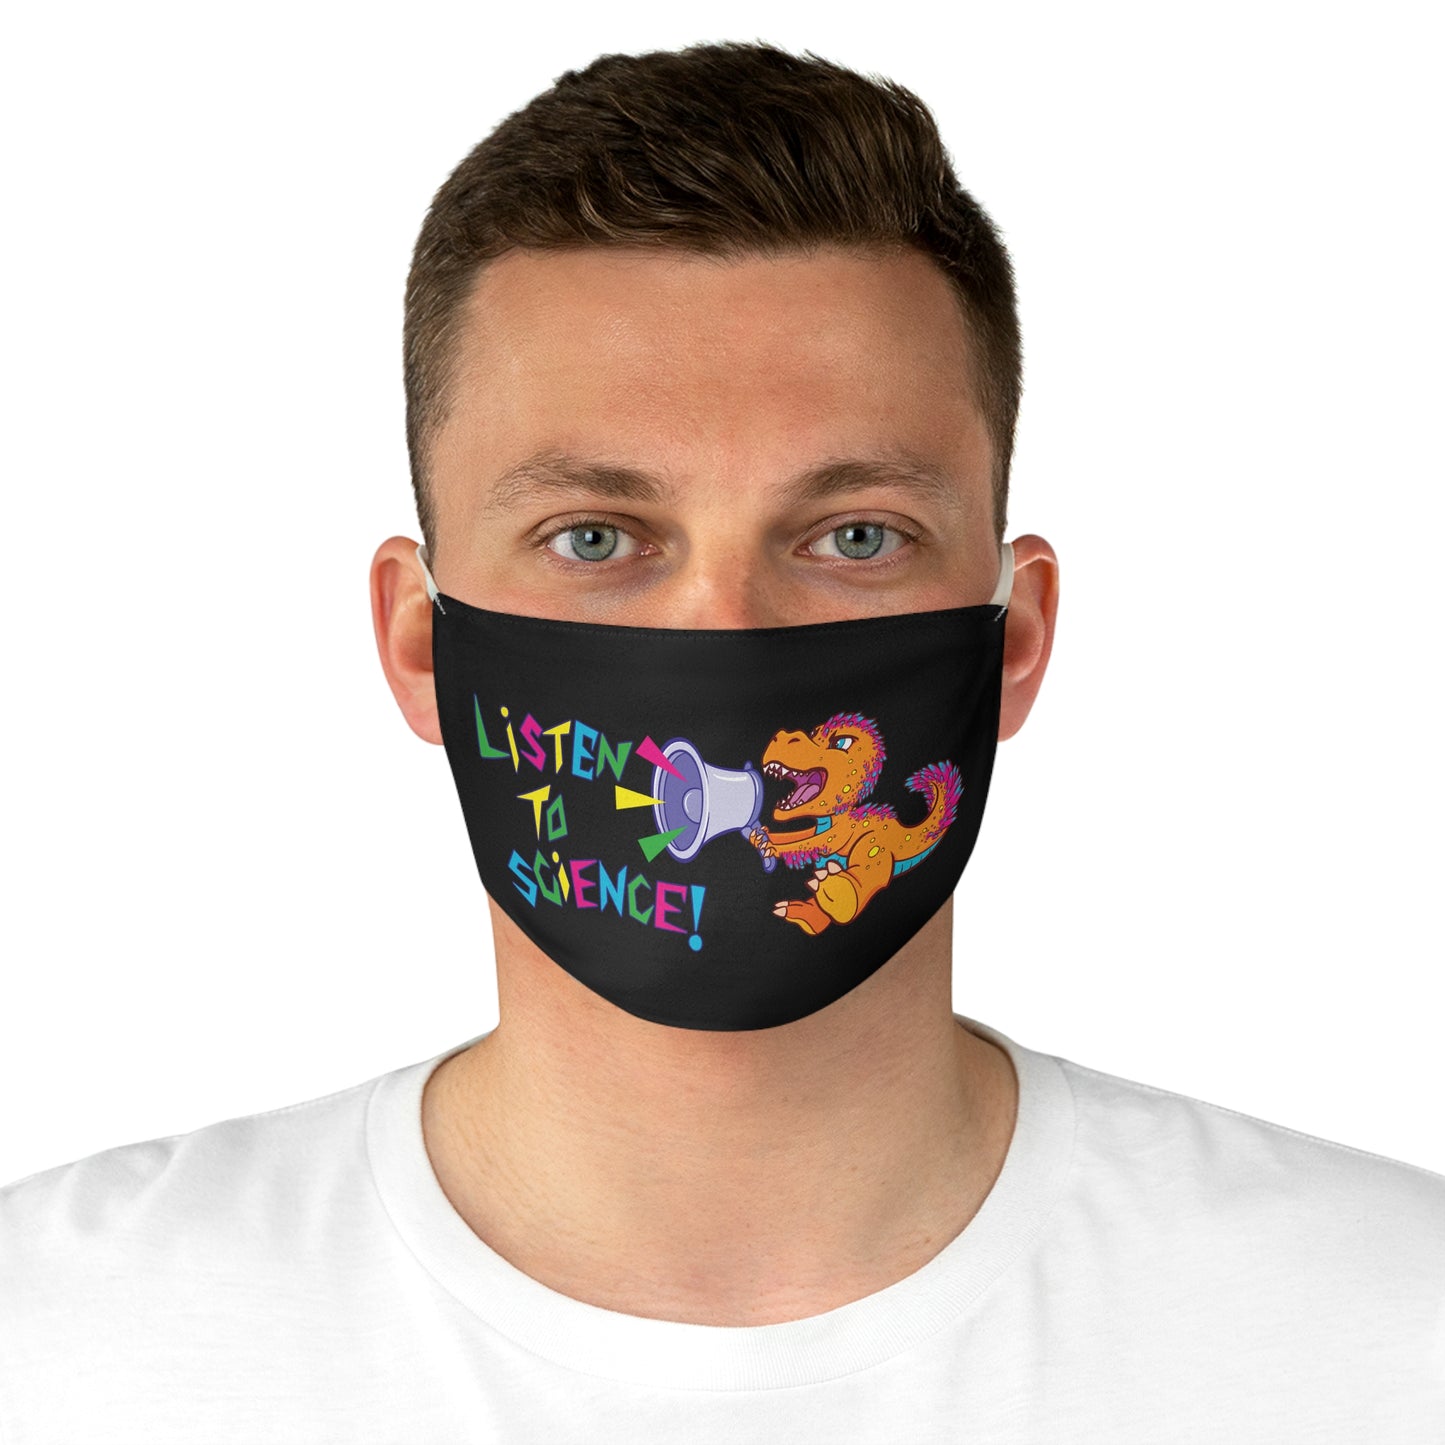 "Science!" - Fabric Face Mask